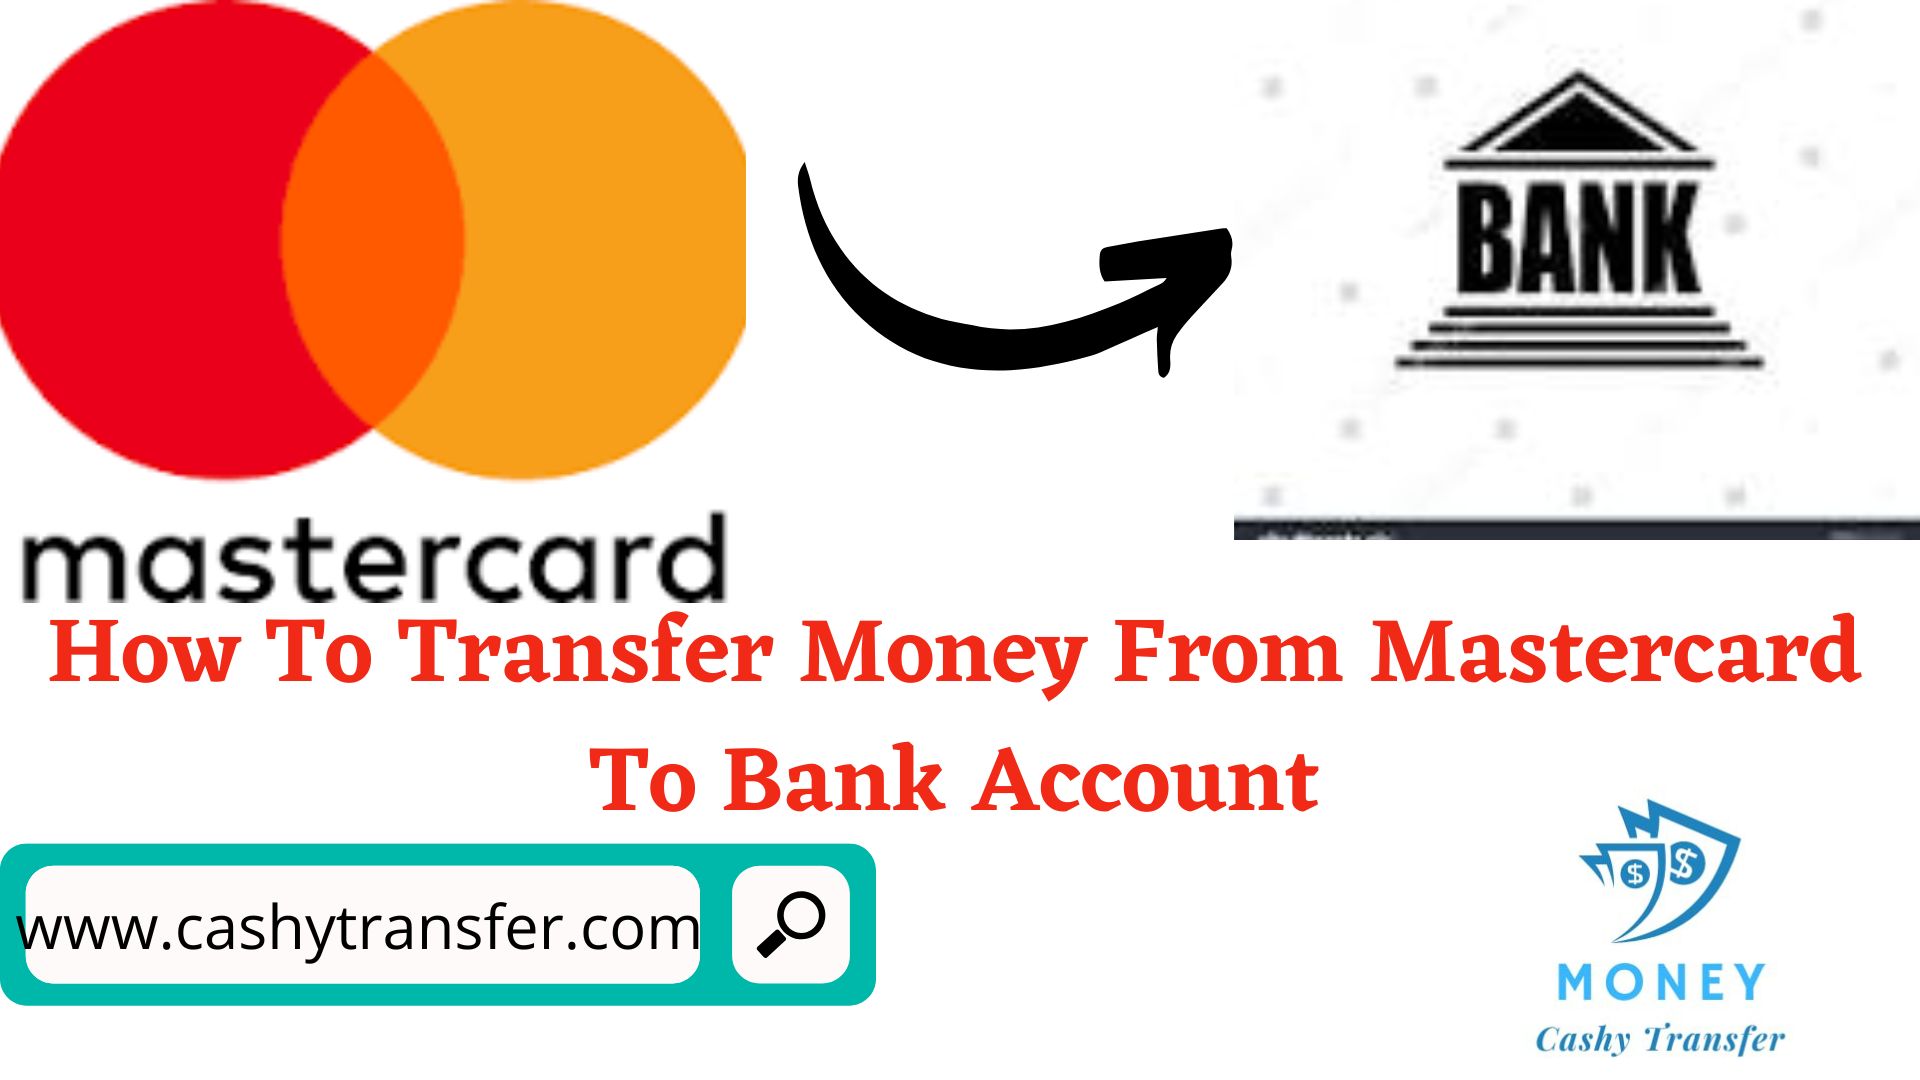 Transfer Money From Mastercard To Bank Account